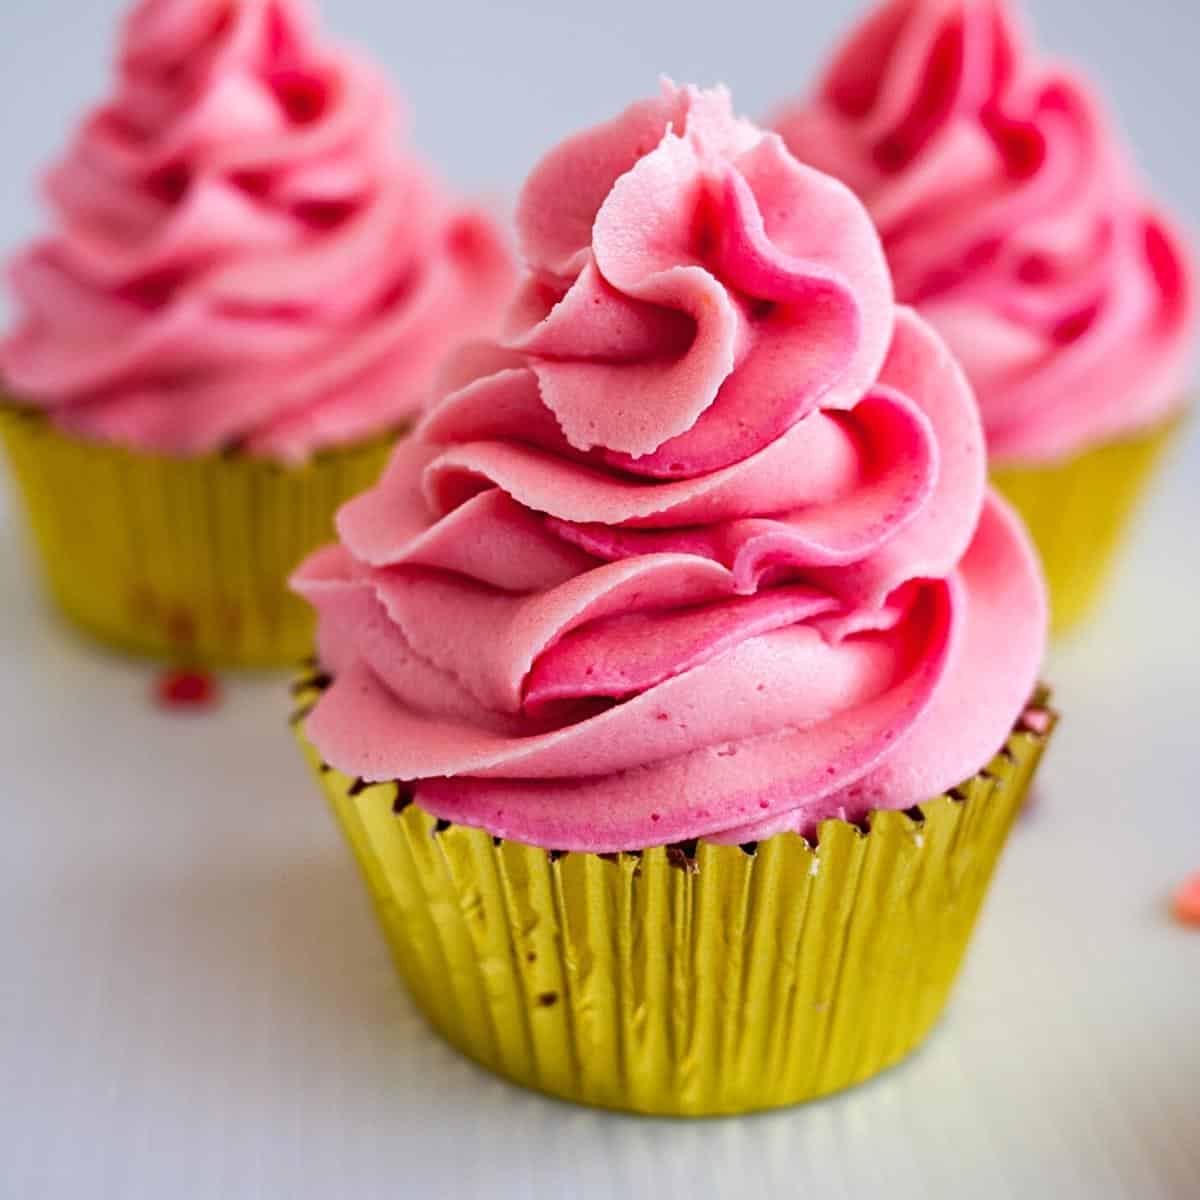 Buttercream Recipes – Frosting